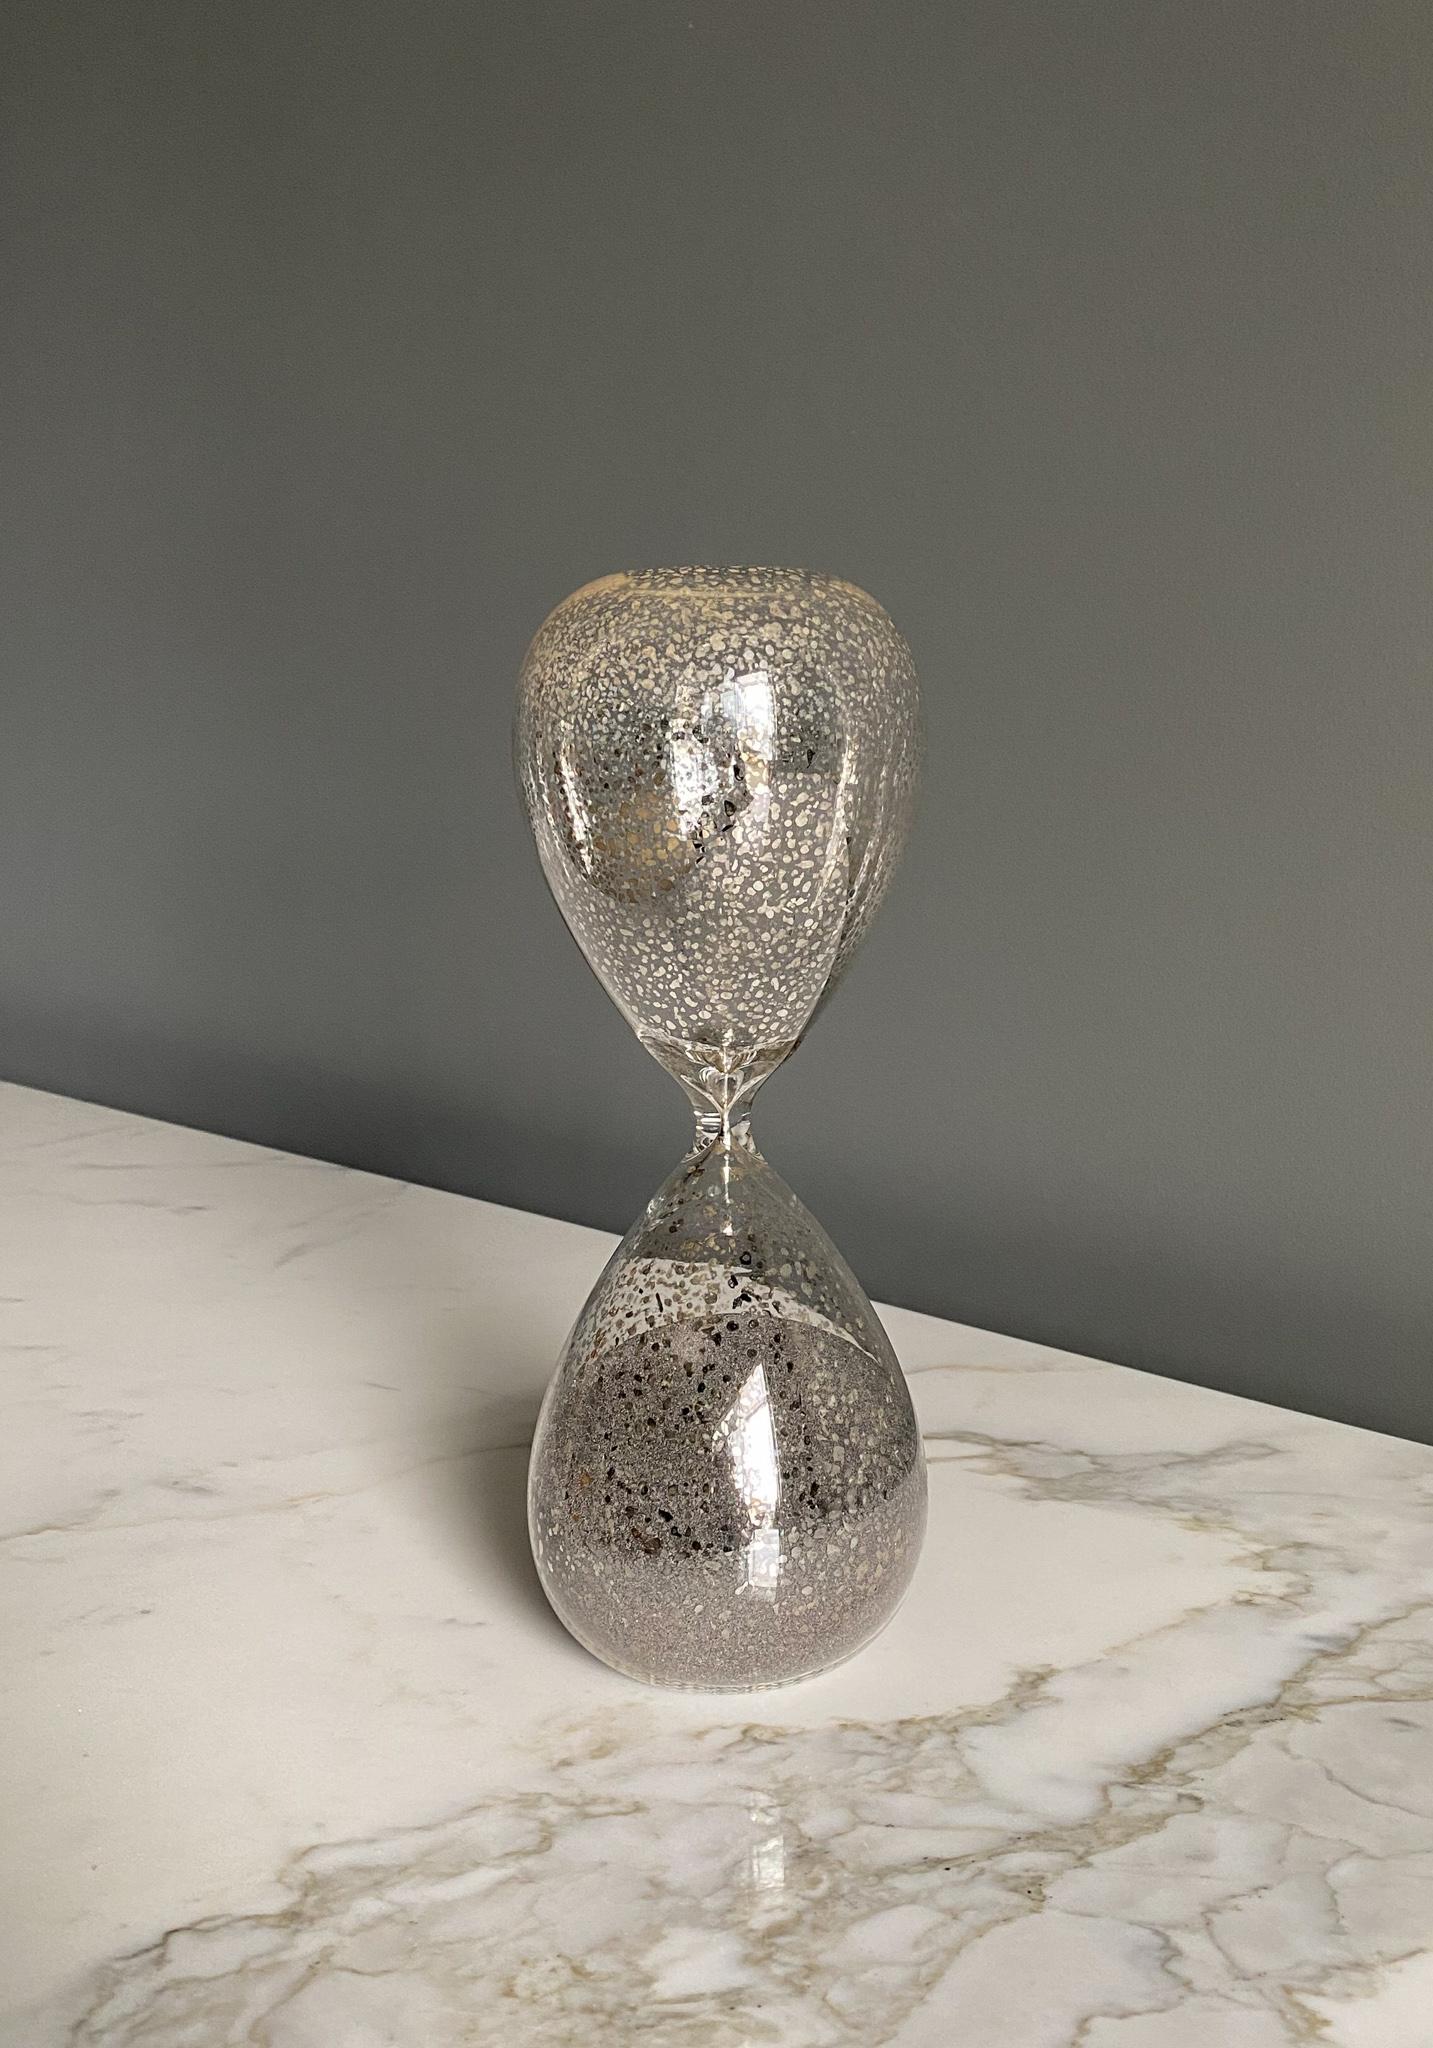 Modernist hourglass with silver details, 1990's.